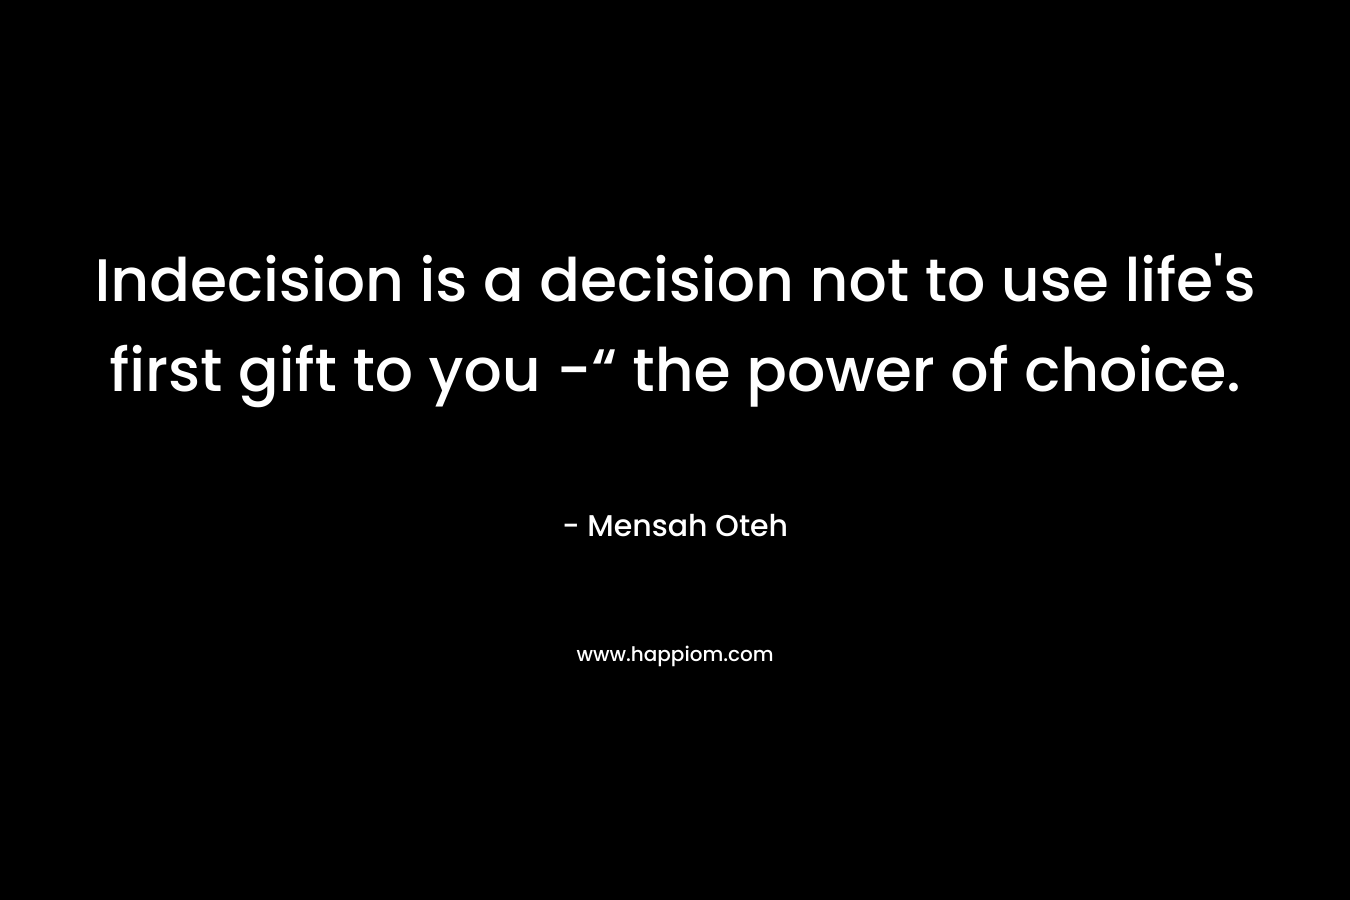 Indecision is a decision not to use life's first gift to you -“ the power of choice.